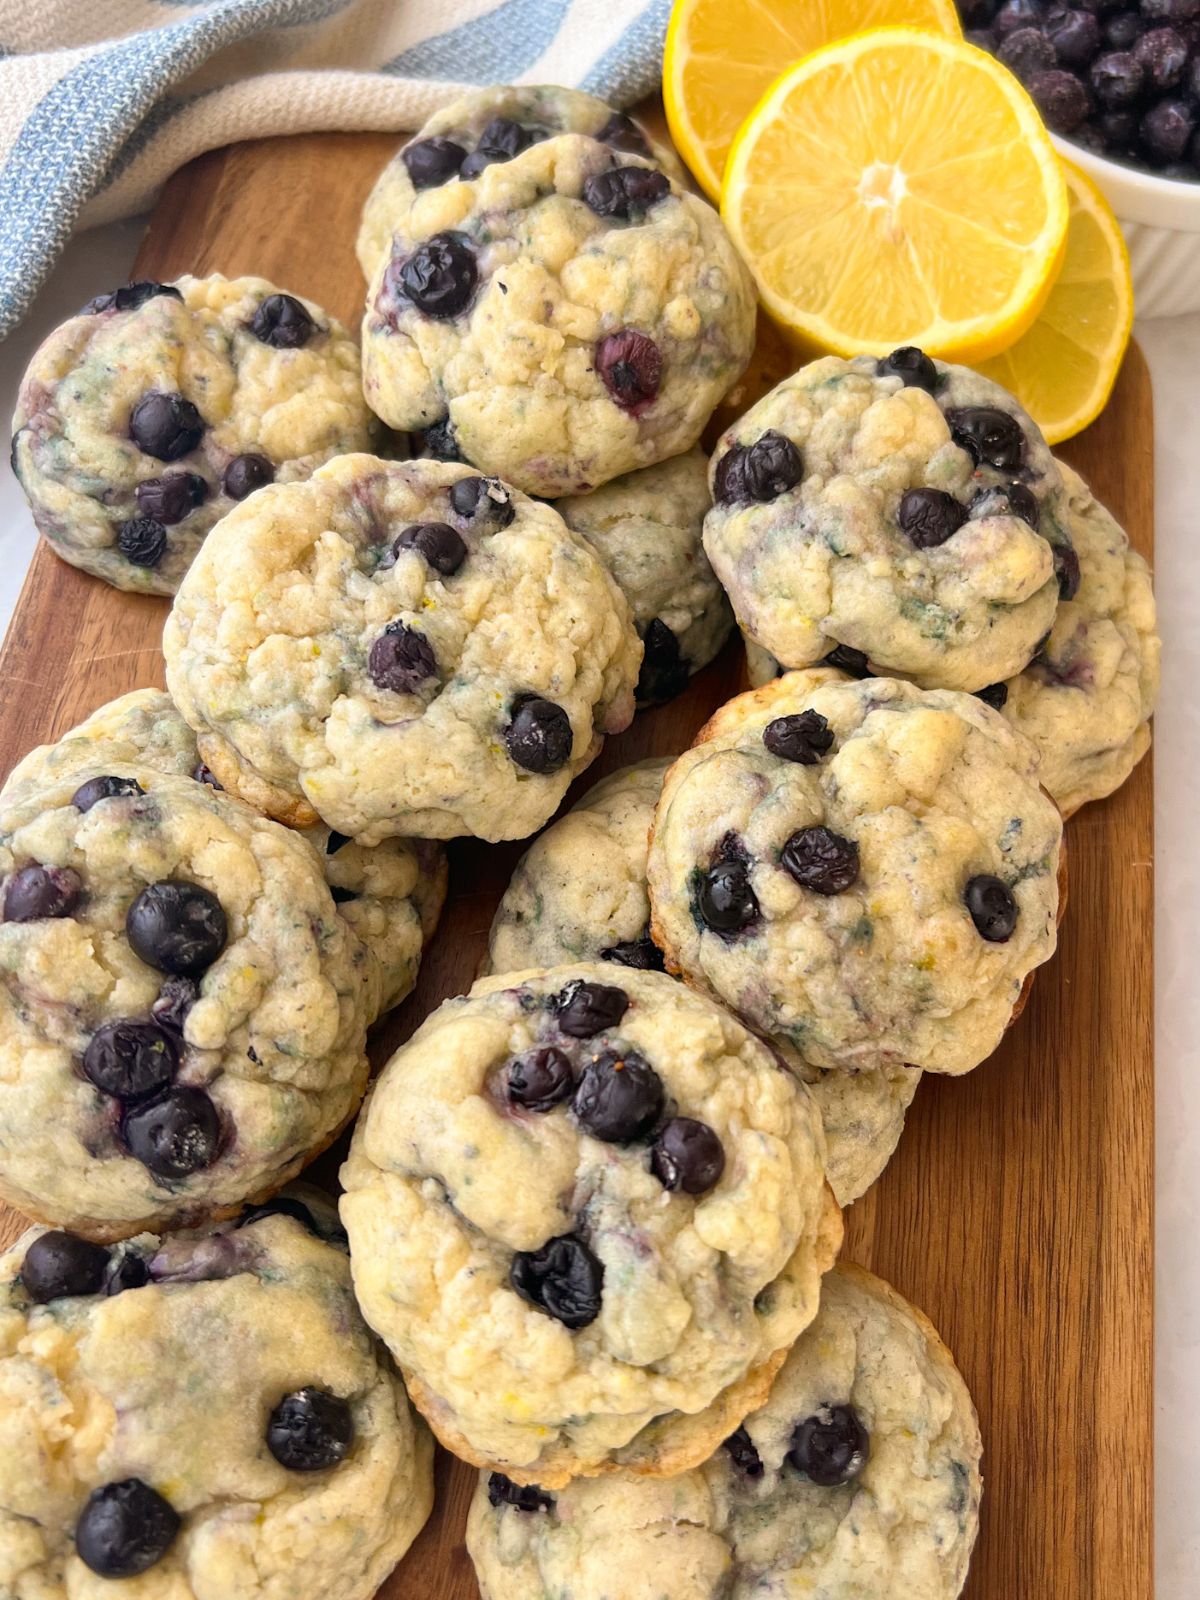 13 lemon blueberry cookies on a cutting board with a bowl of blueberries and cut lemons in the background.